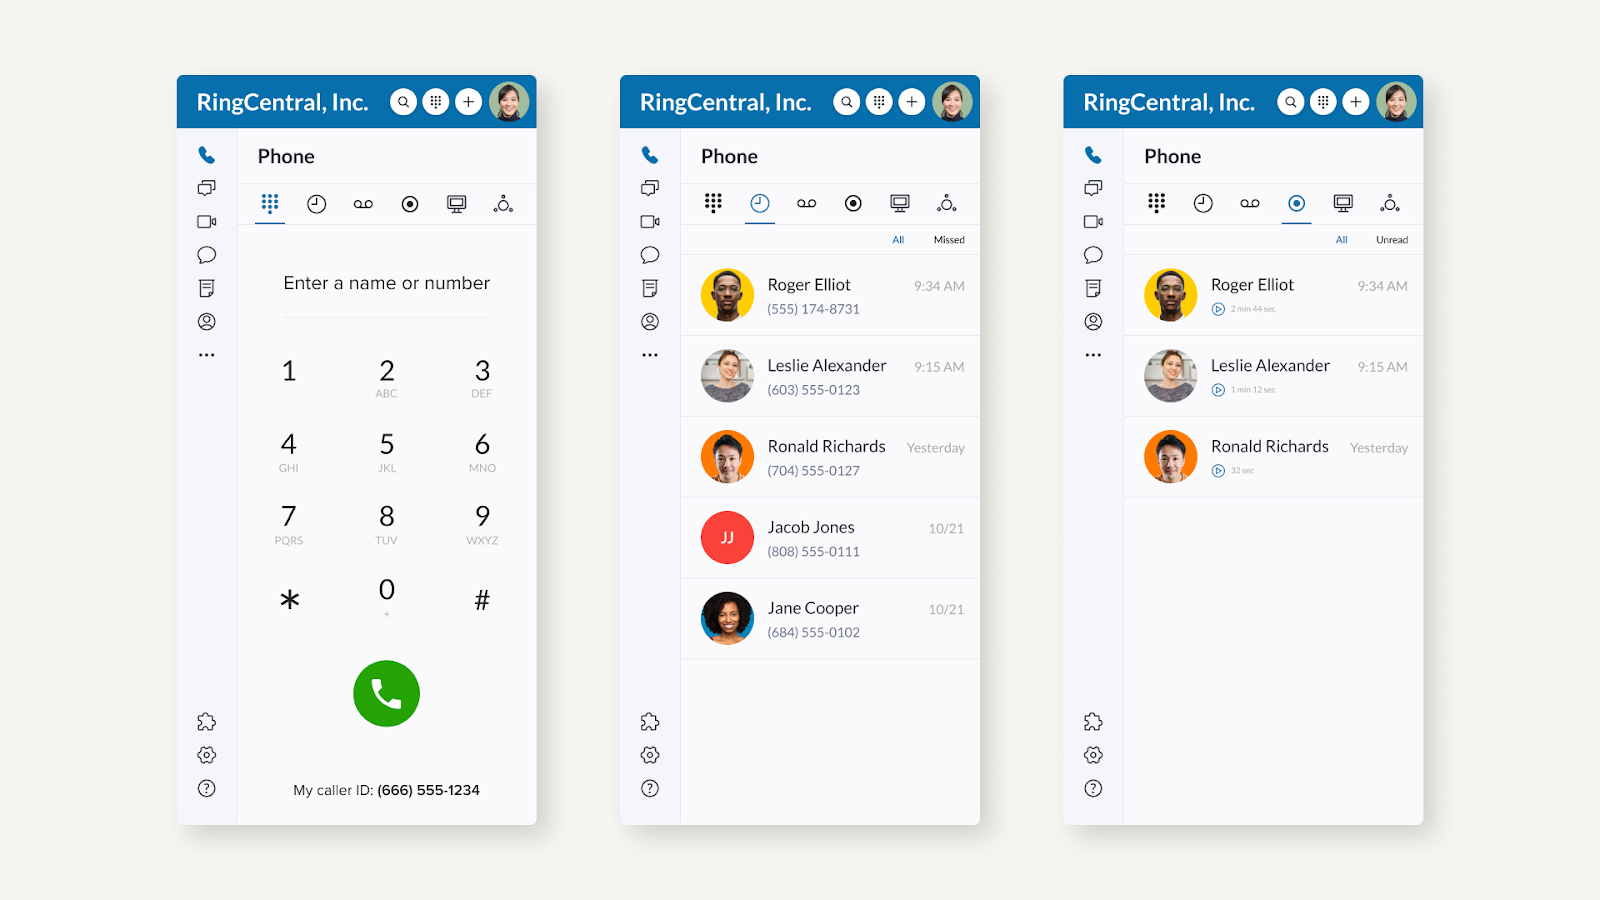 Three screenshots of the RingCentral dial pad, call log, and call recordings on the mobile app.